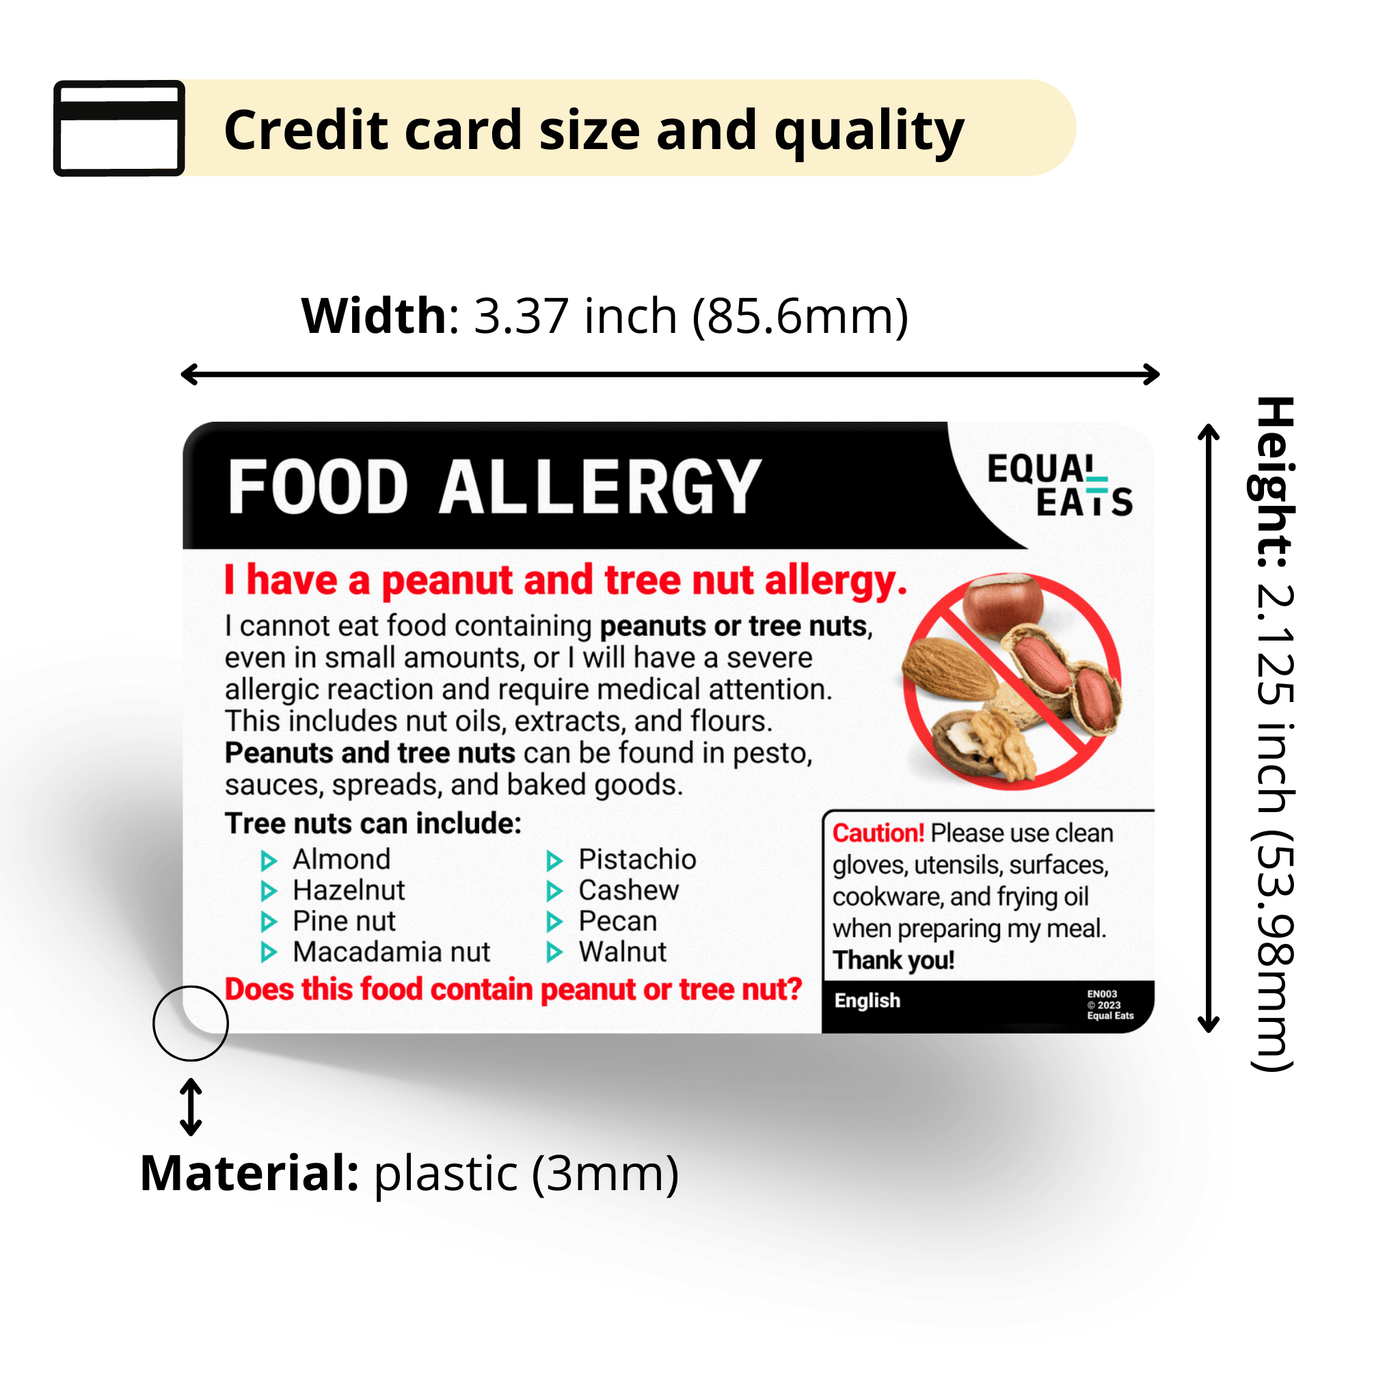 Portuguese (Portugal) Peanut and Tree Nut Allergy Card